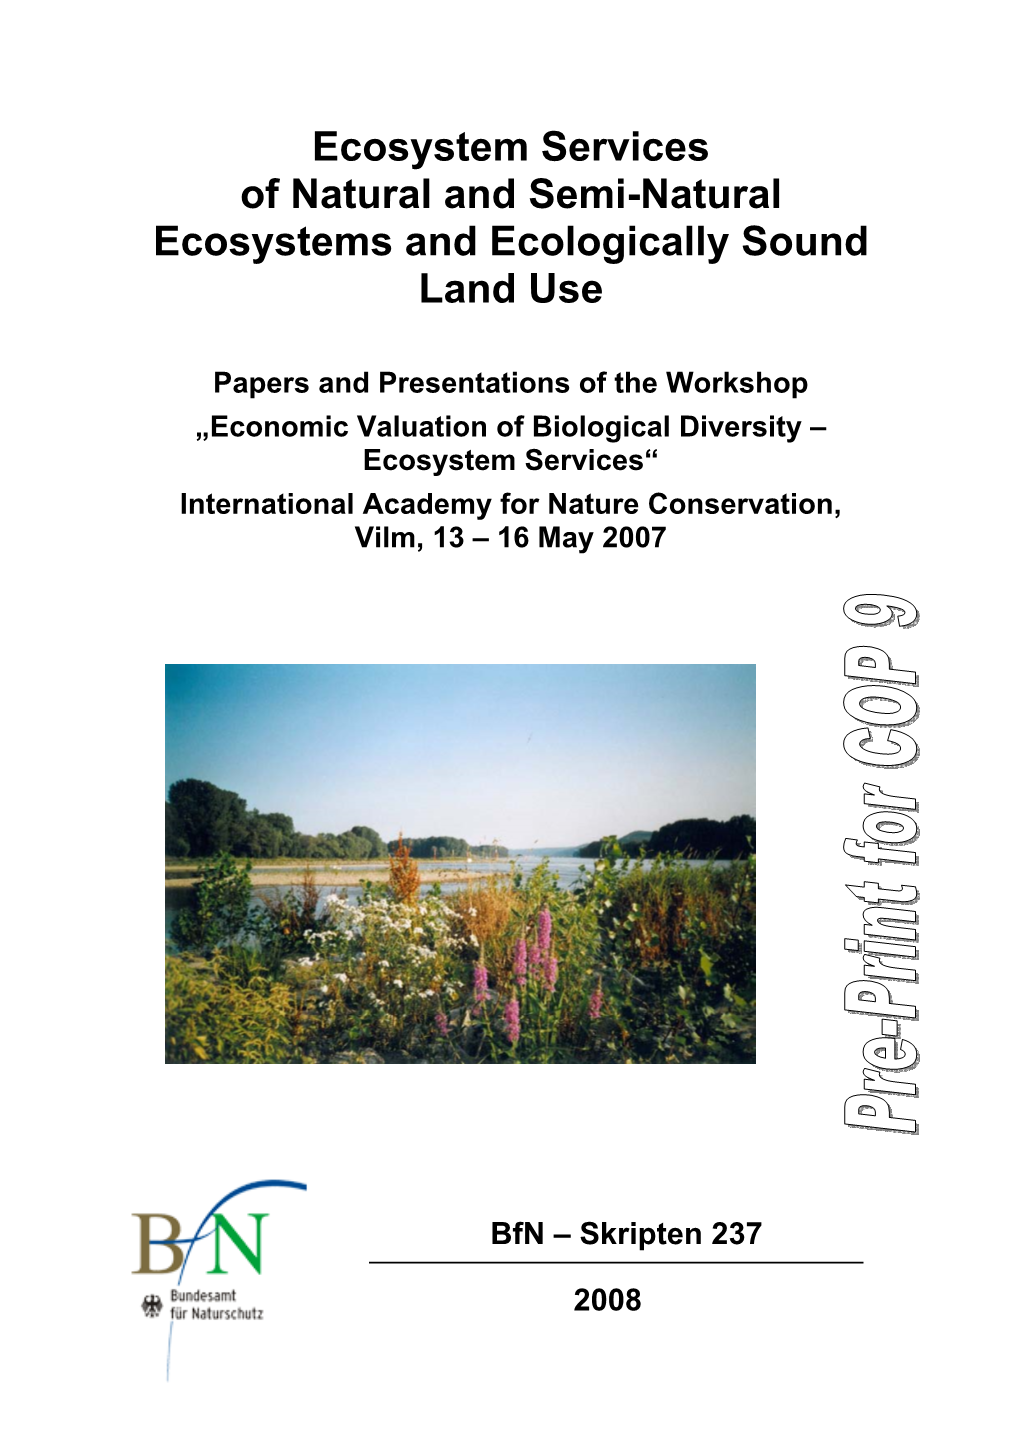 Ecosystem Services of Natural and Semi-Natural Ecosystems and Ecologically Sound Land Use